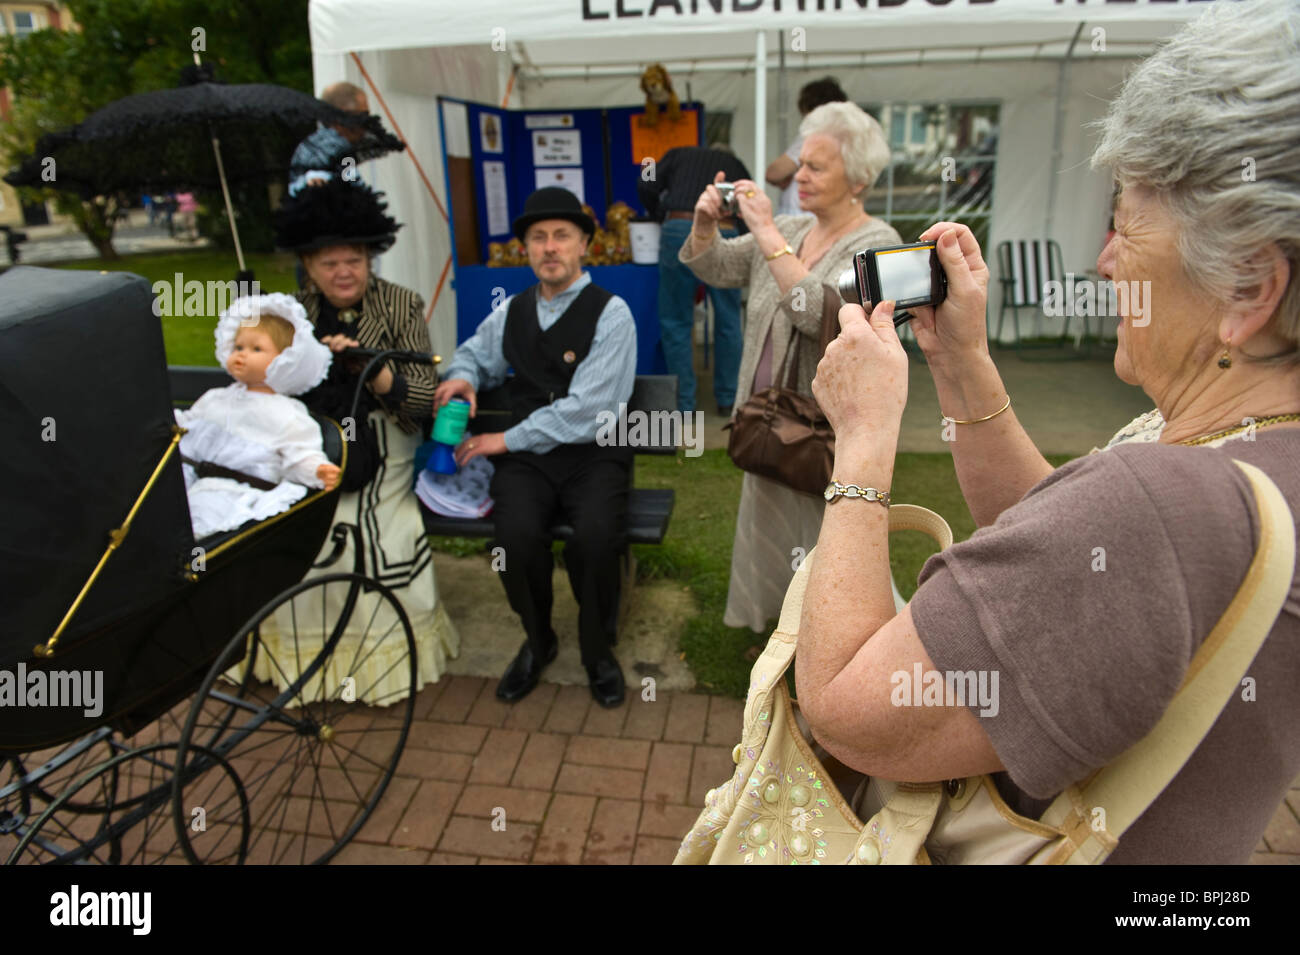 Family with baby in pram in period costume being photographed at the Victorian Festival in Llandrindod Wells Powys Mid Wales UK Stock Photo